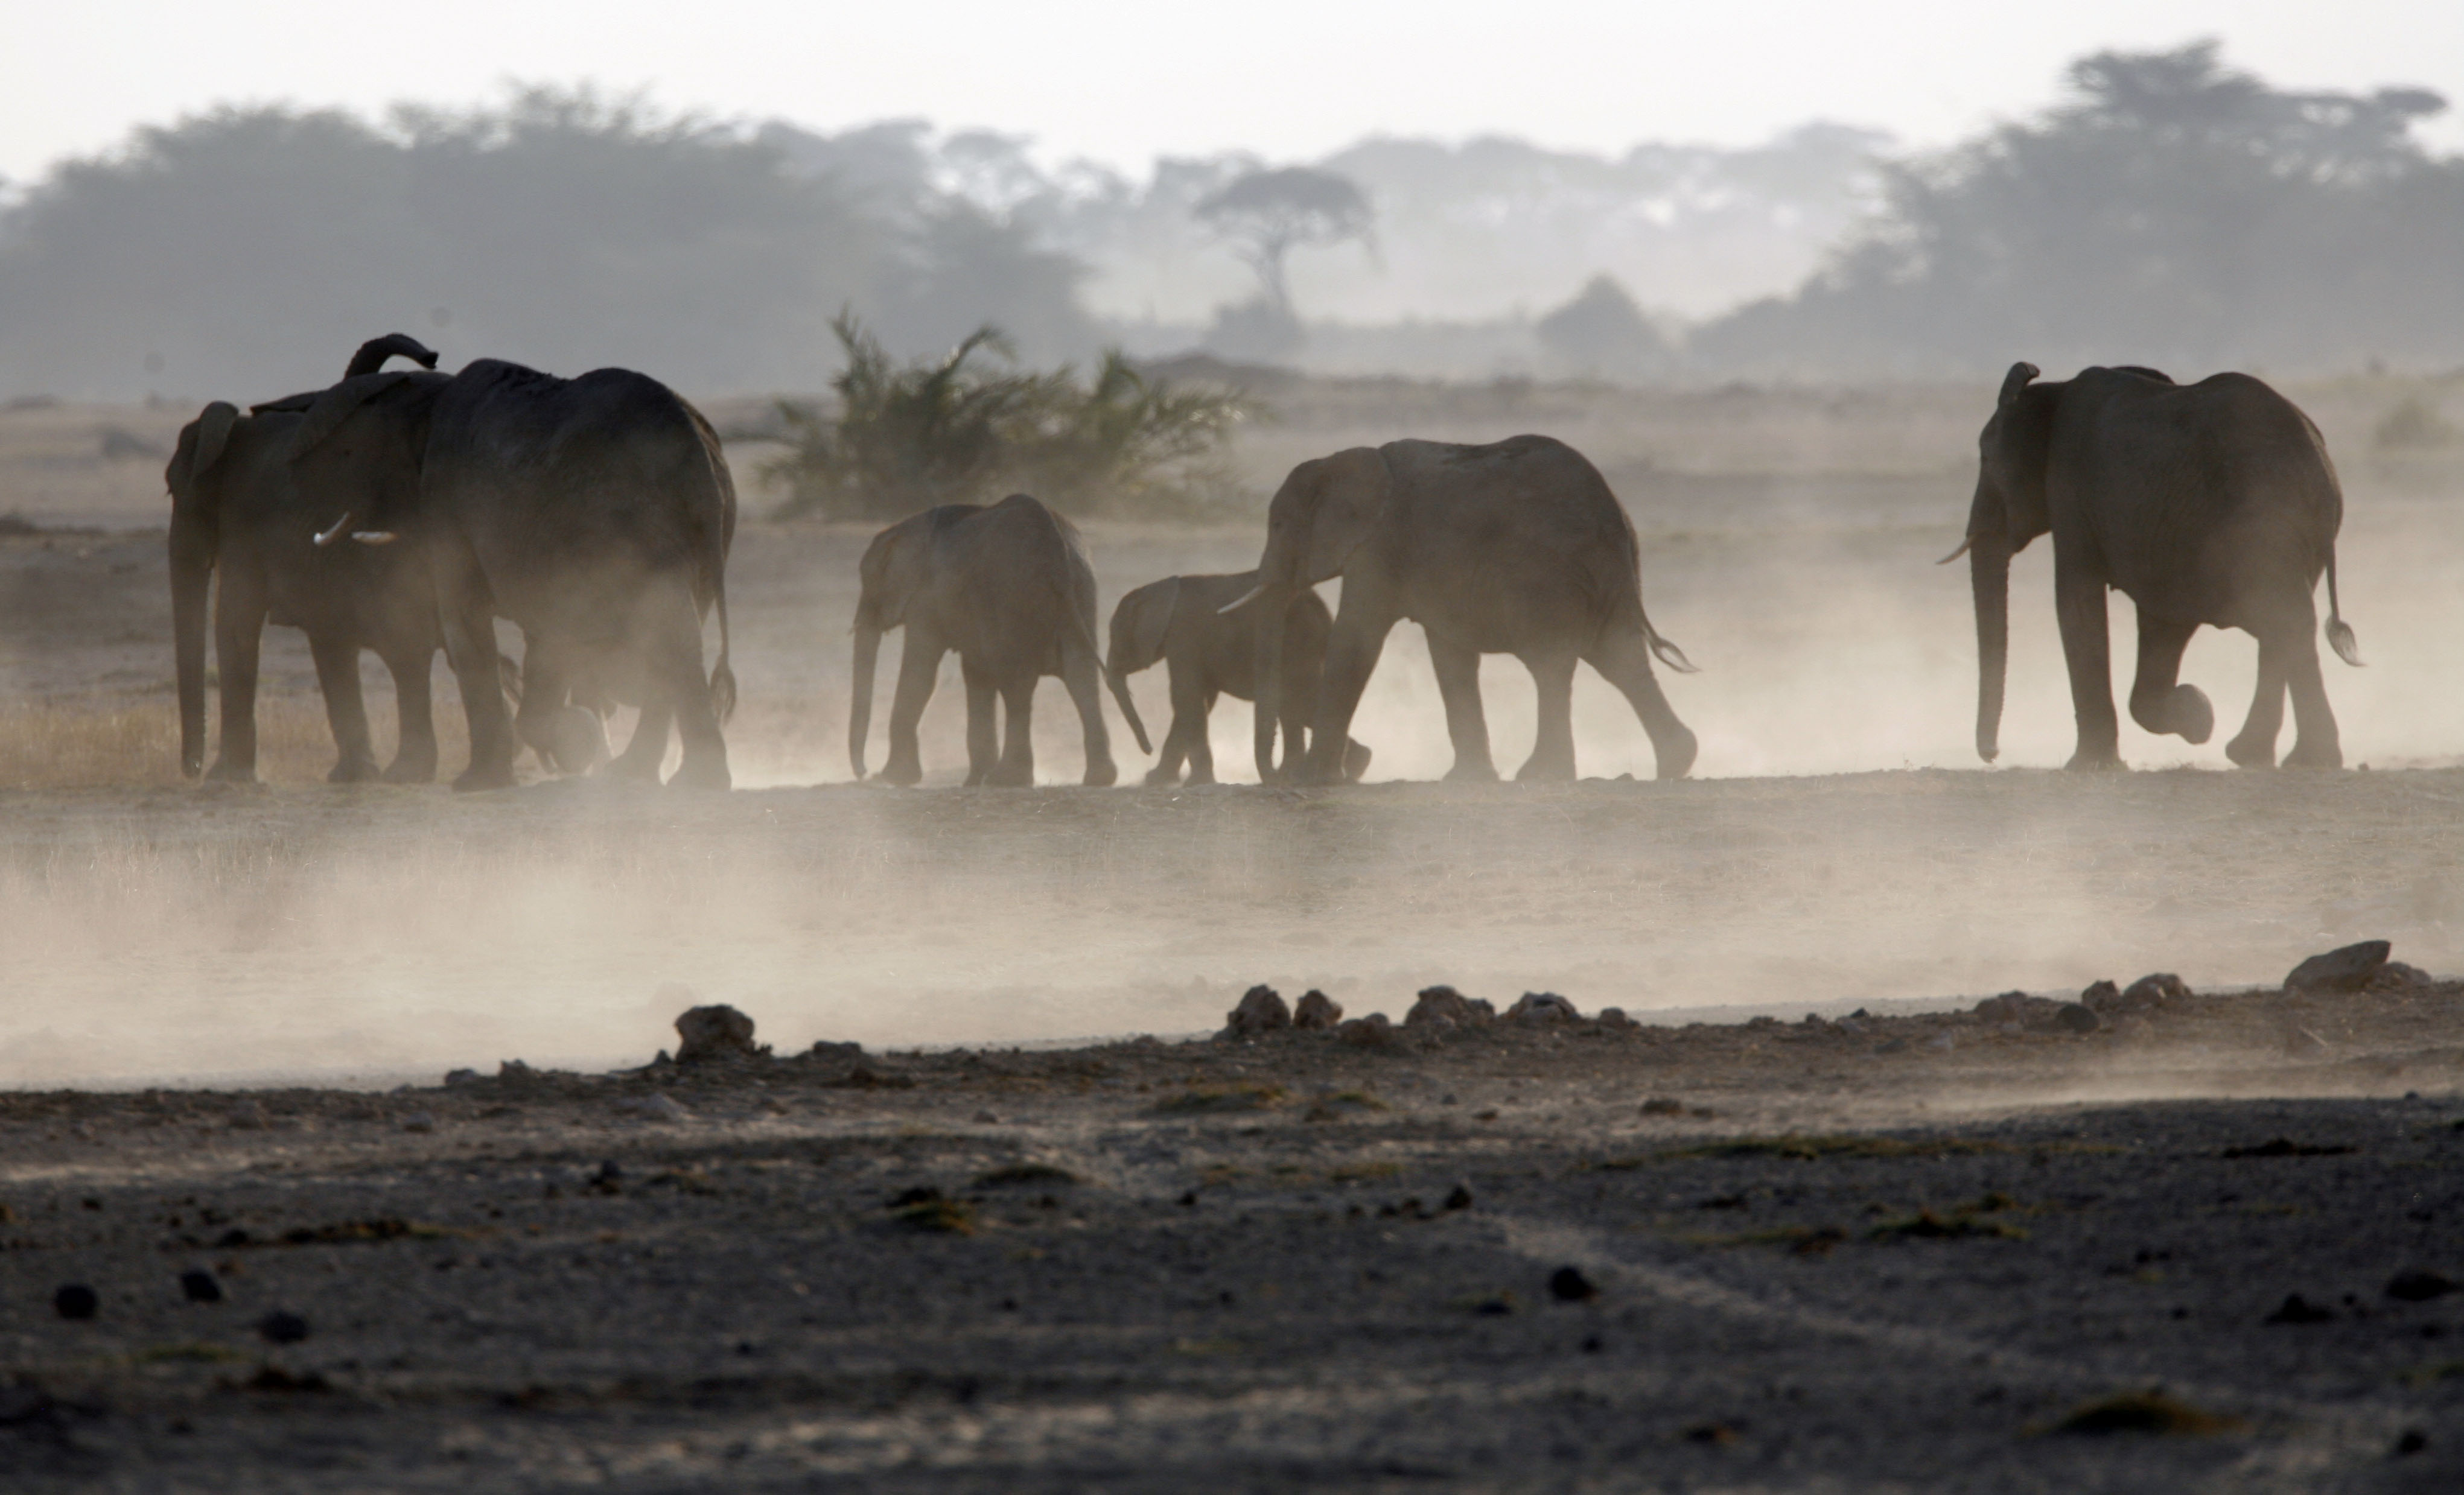 A family of elephants walk to a water pond at dusk in Amboseli national park